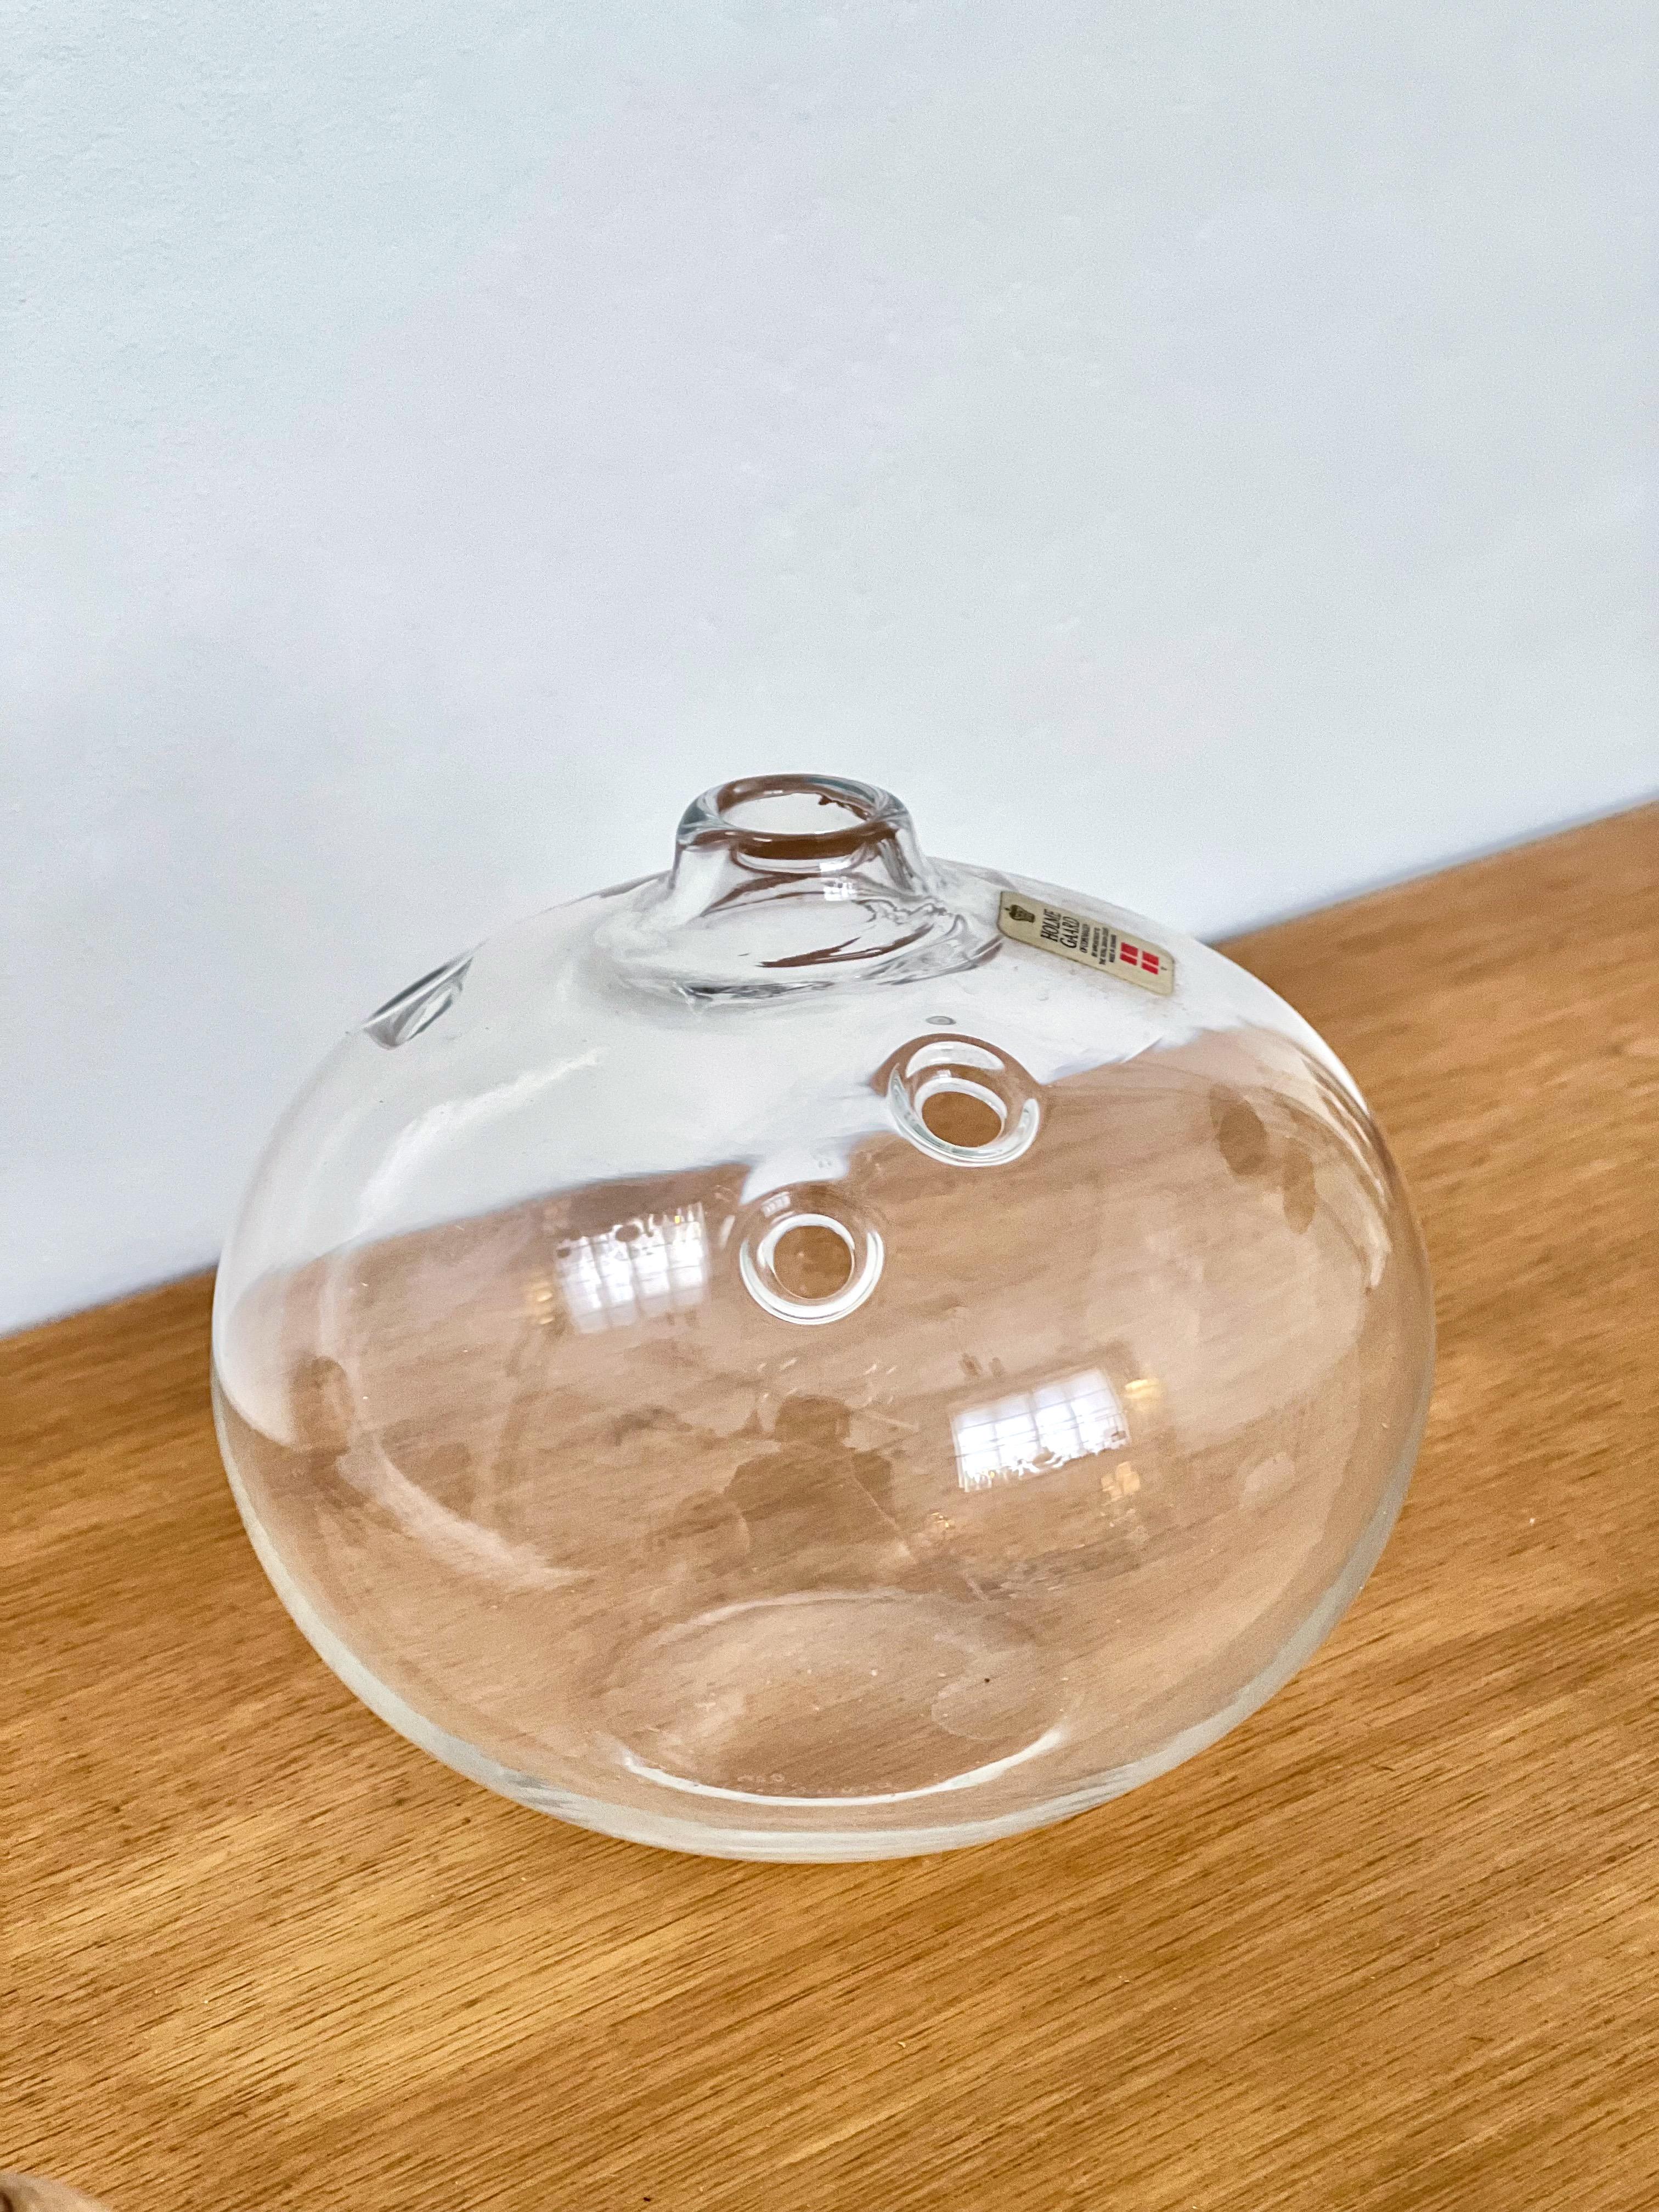 Mouth blown clear glass Hull (hole) vase, called the Meteor Vase
Designed by Michael Bang for Holmegaard, Denmarkt, 1970s. Produced between 1973-1978. 
The transparent glass of the body are added of the holes that give breath to the internal